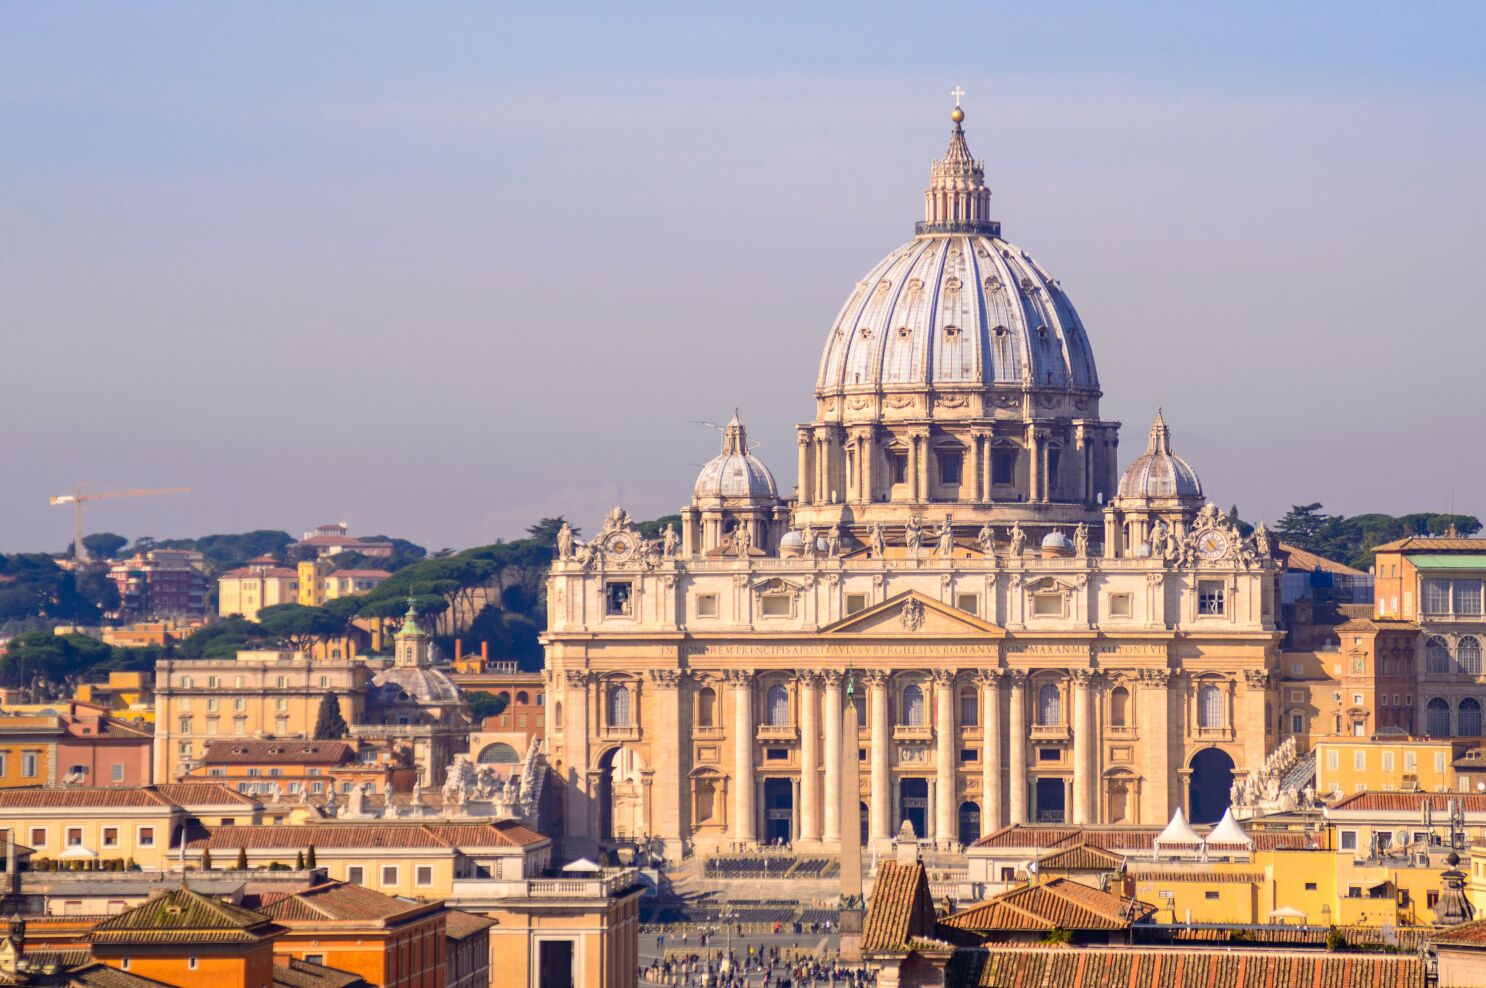 Why Is Saint Peter's Basilica Considered One Of The Holiest Places Of Christianity